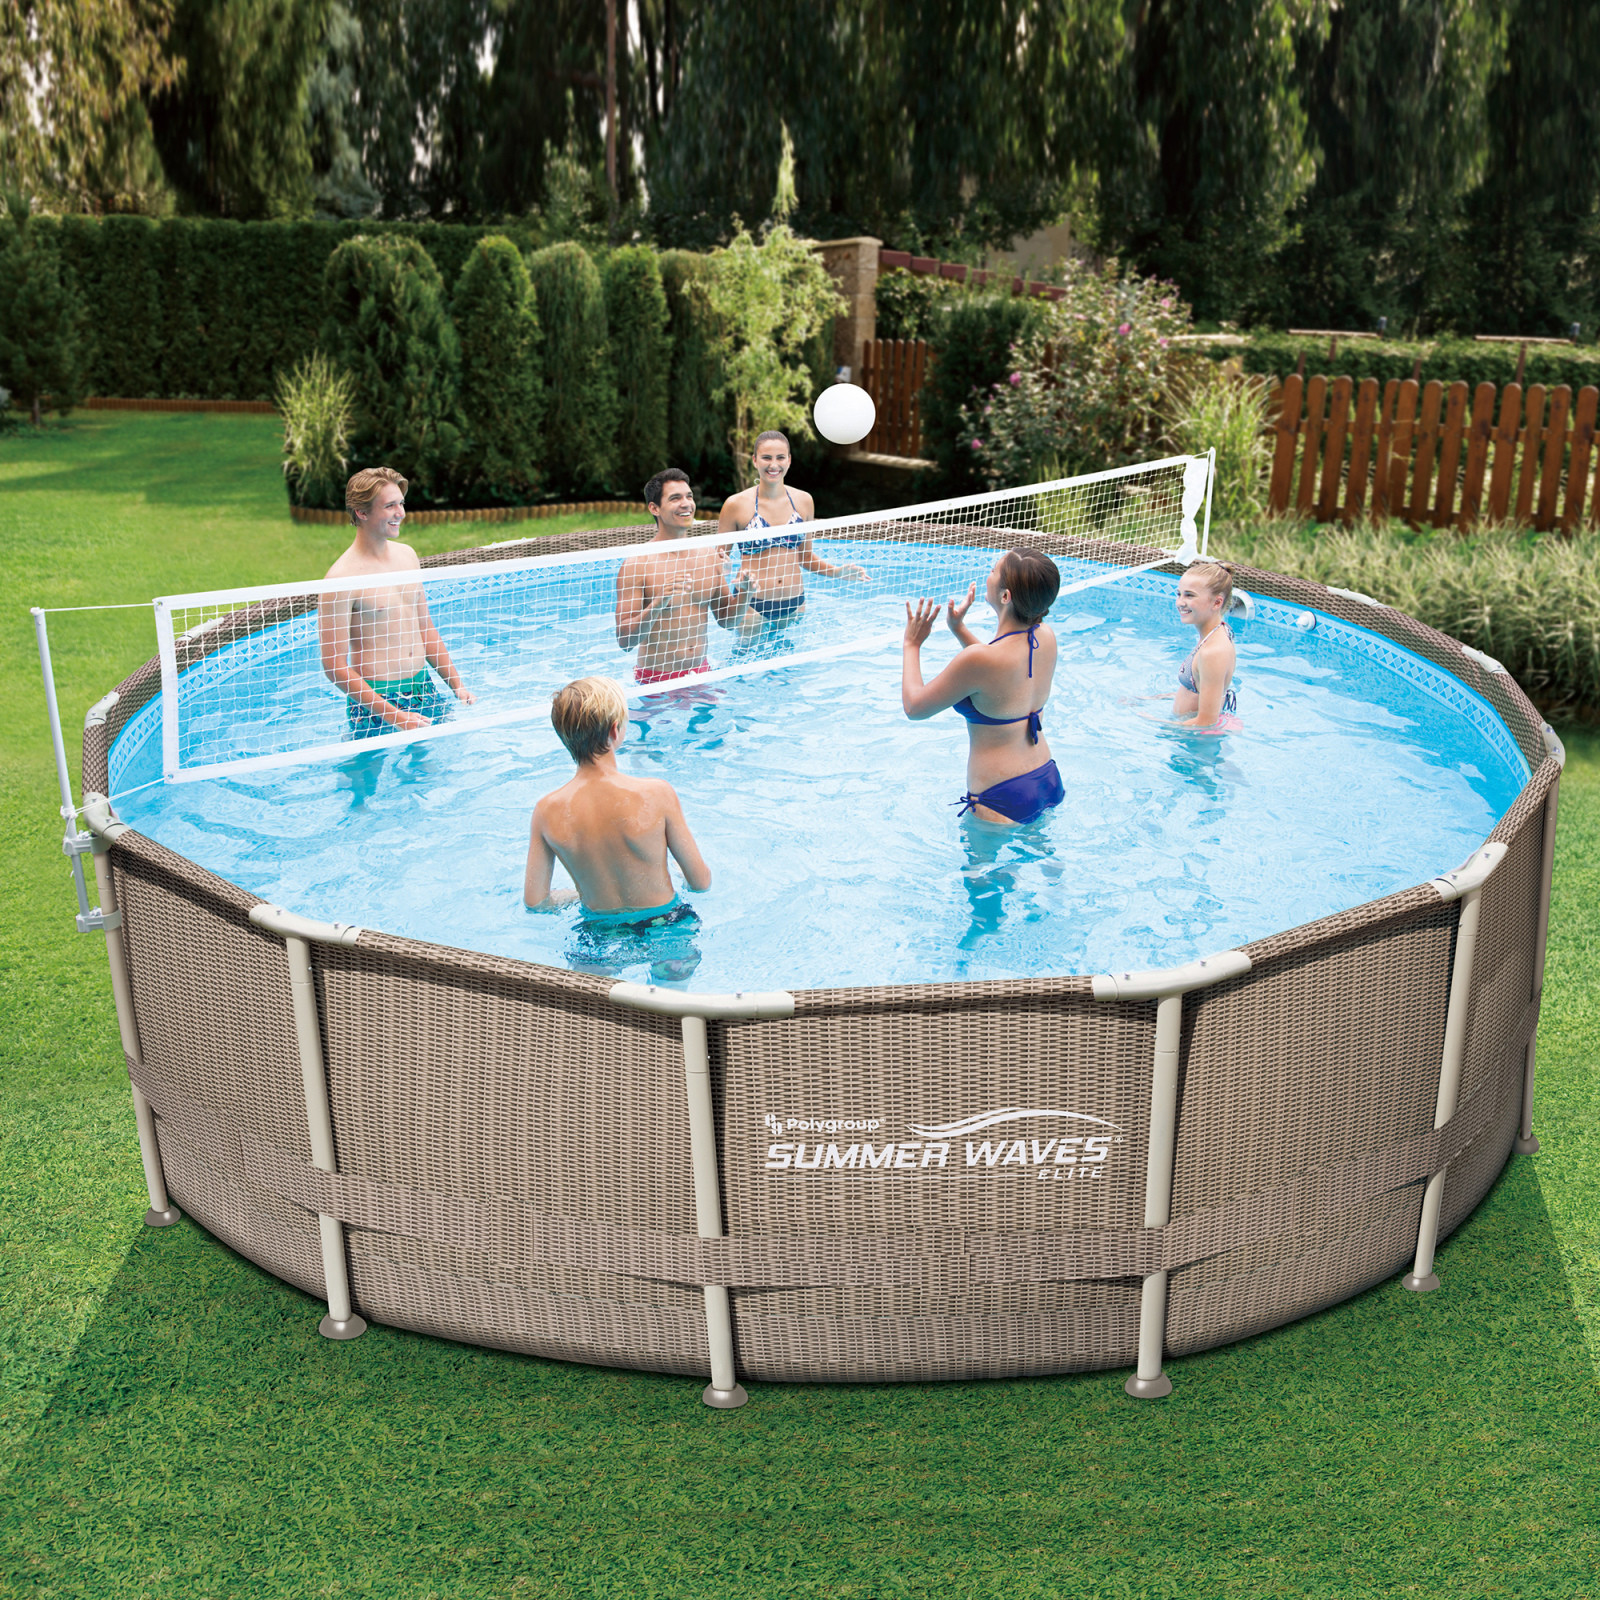 Summer Waves Above Ground Pool
 Summer Waves Volleyball Net for 10 20 Metal Frame